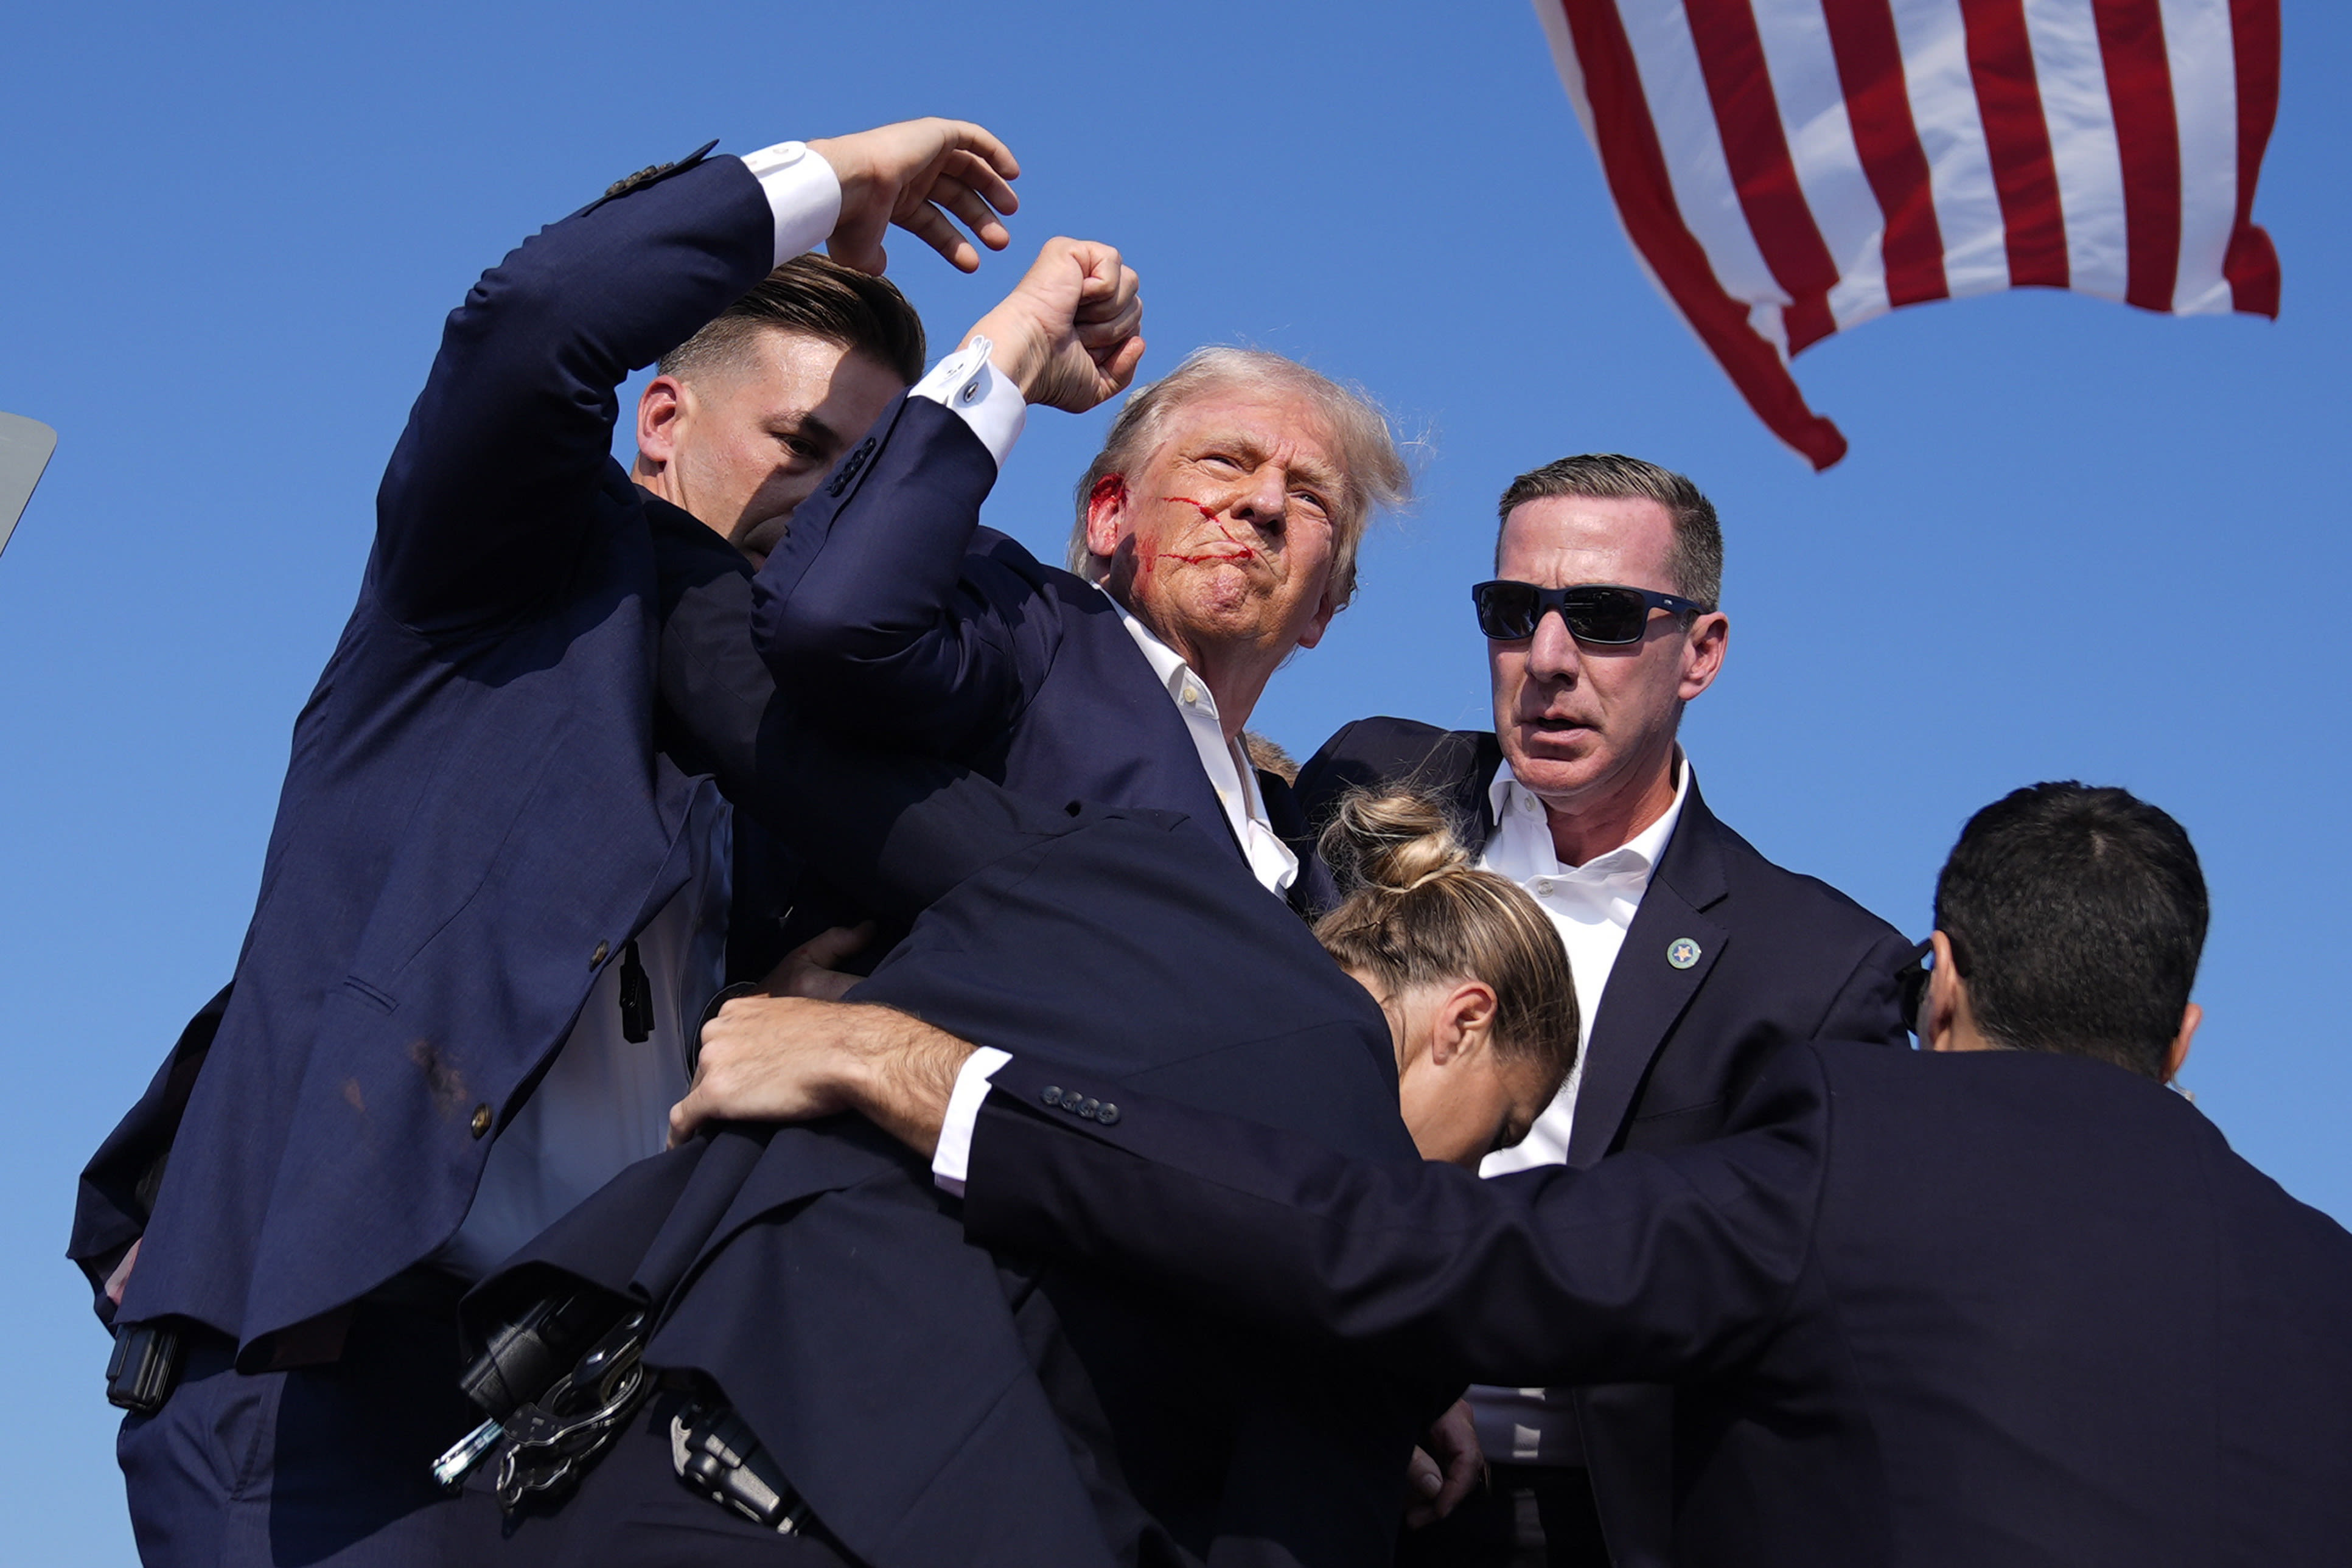 Trump survives assassination attempt; FBI identifies shooter. Here's what we know